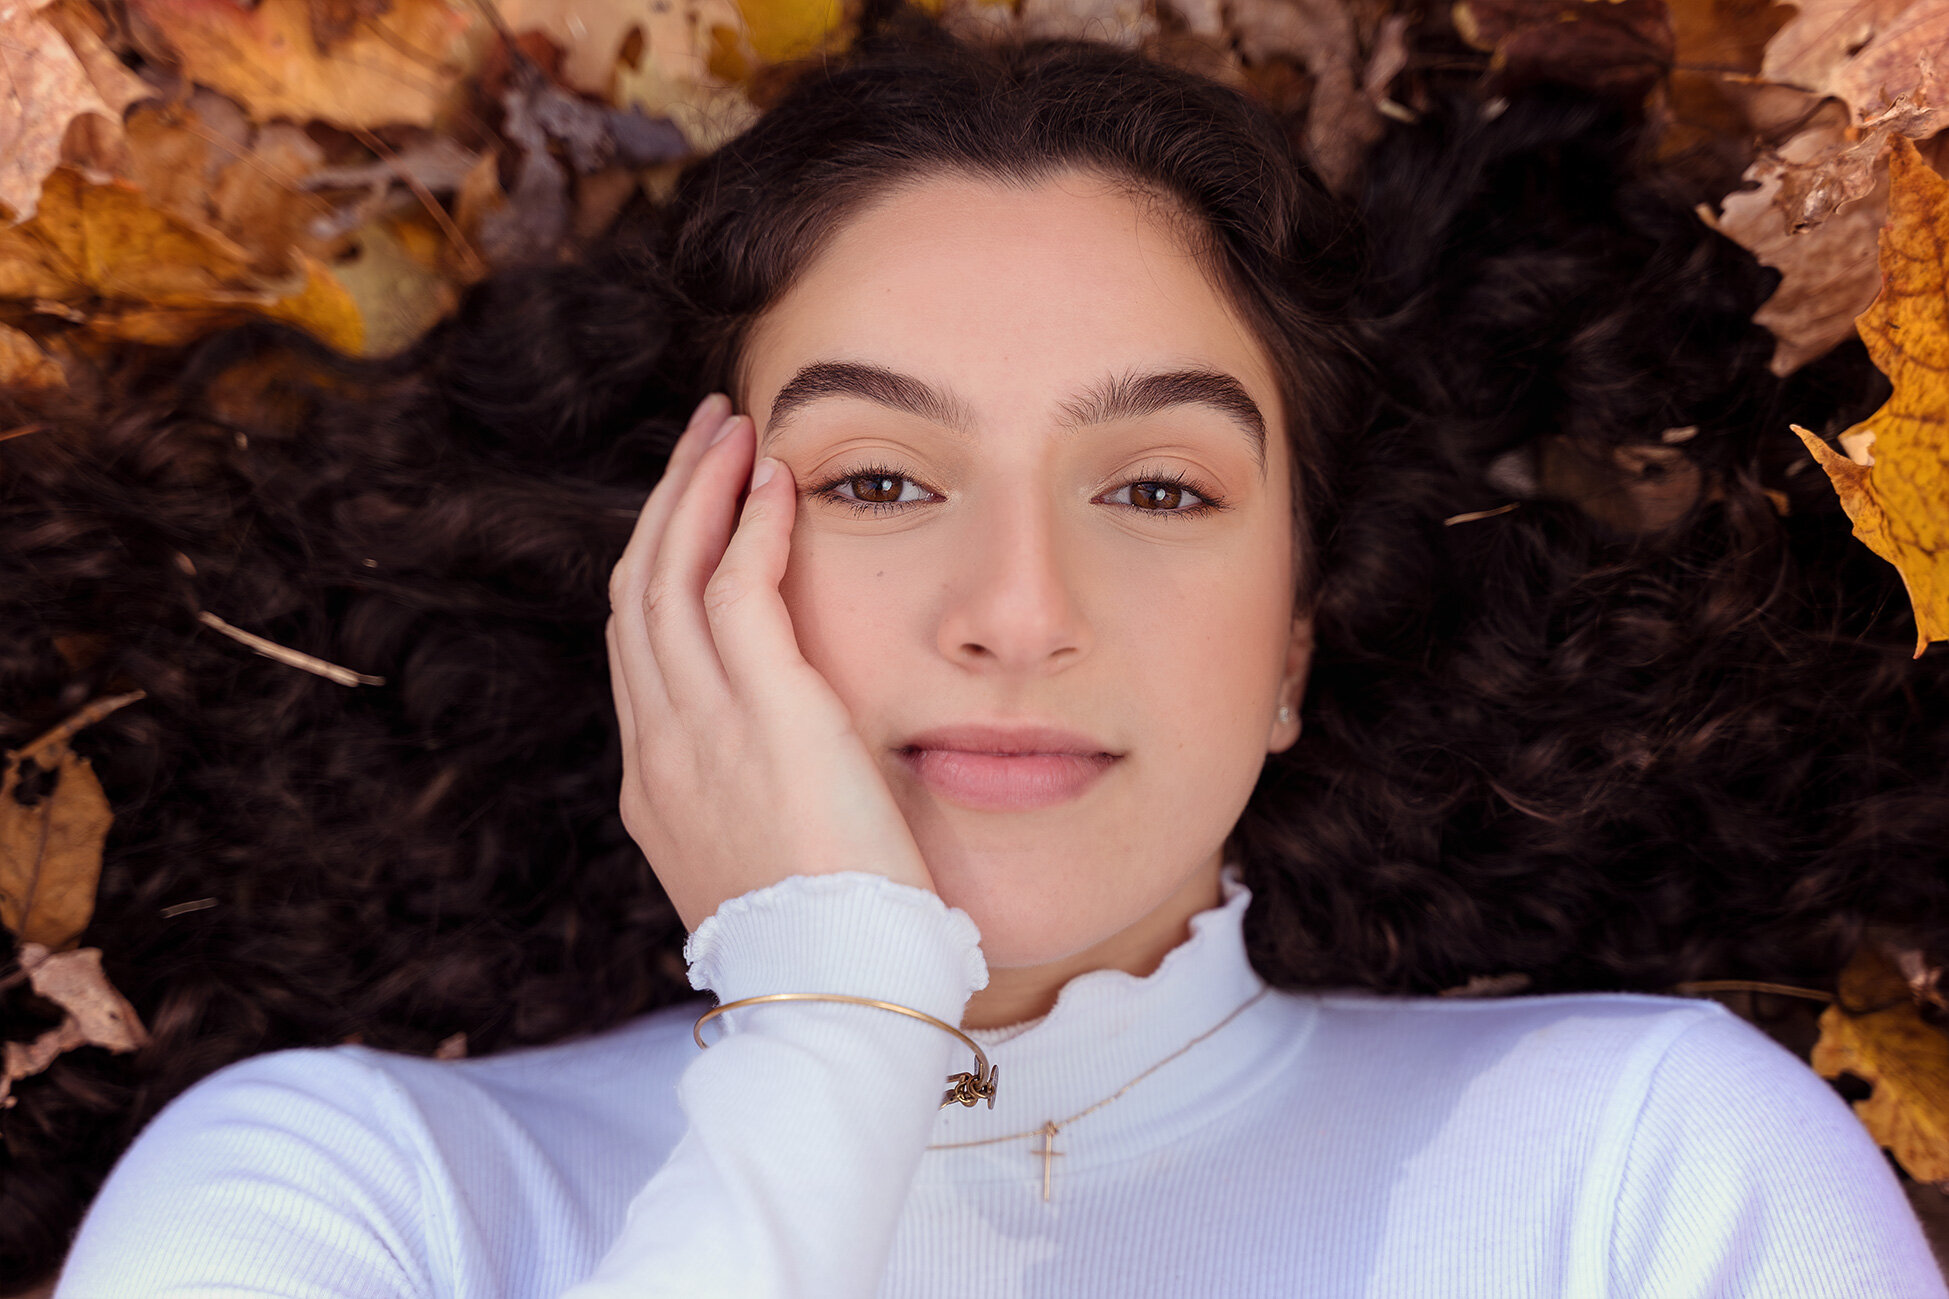 Close up Senior Portrait in the Fall leaves